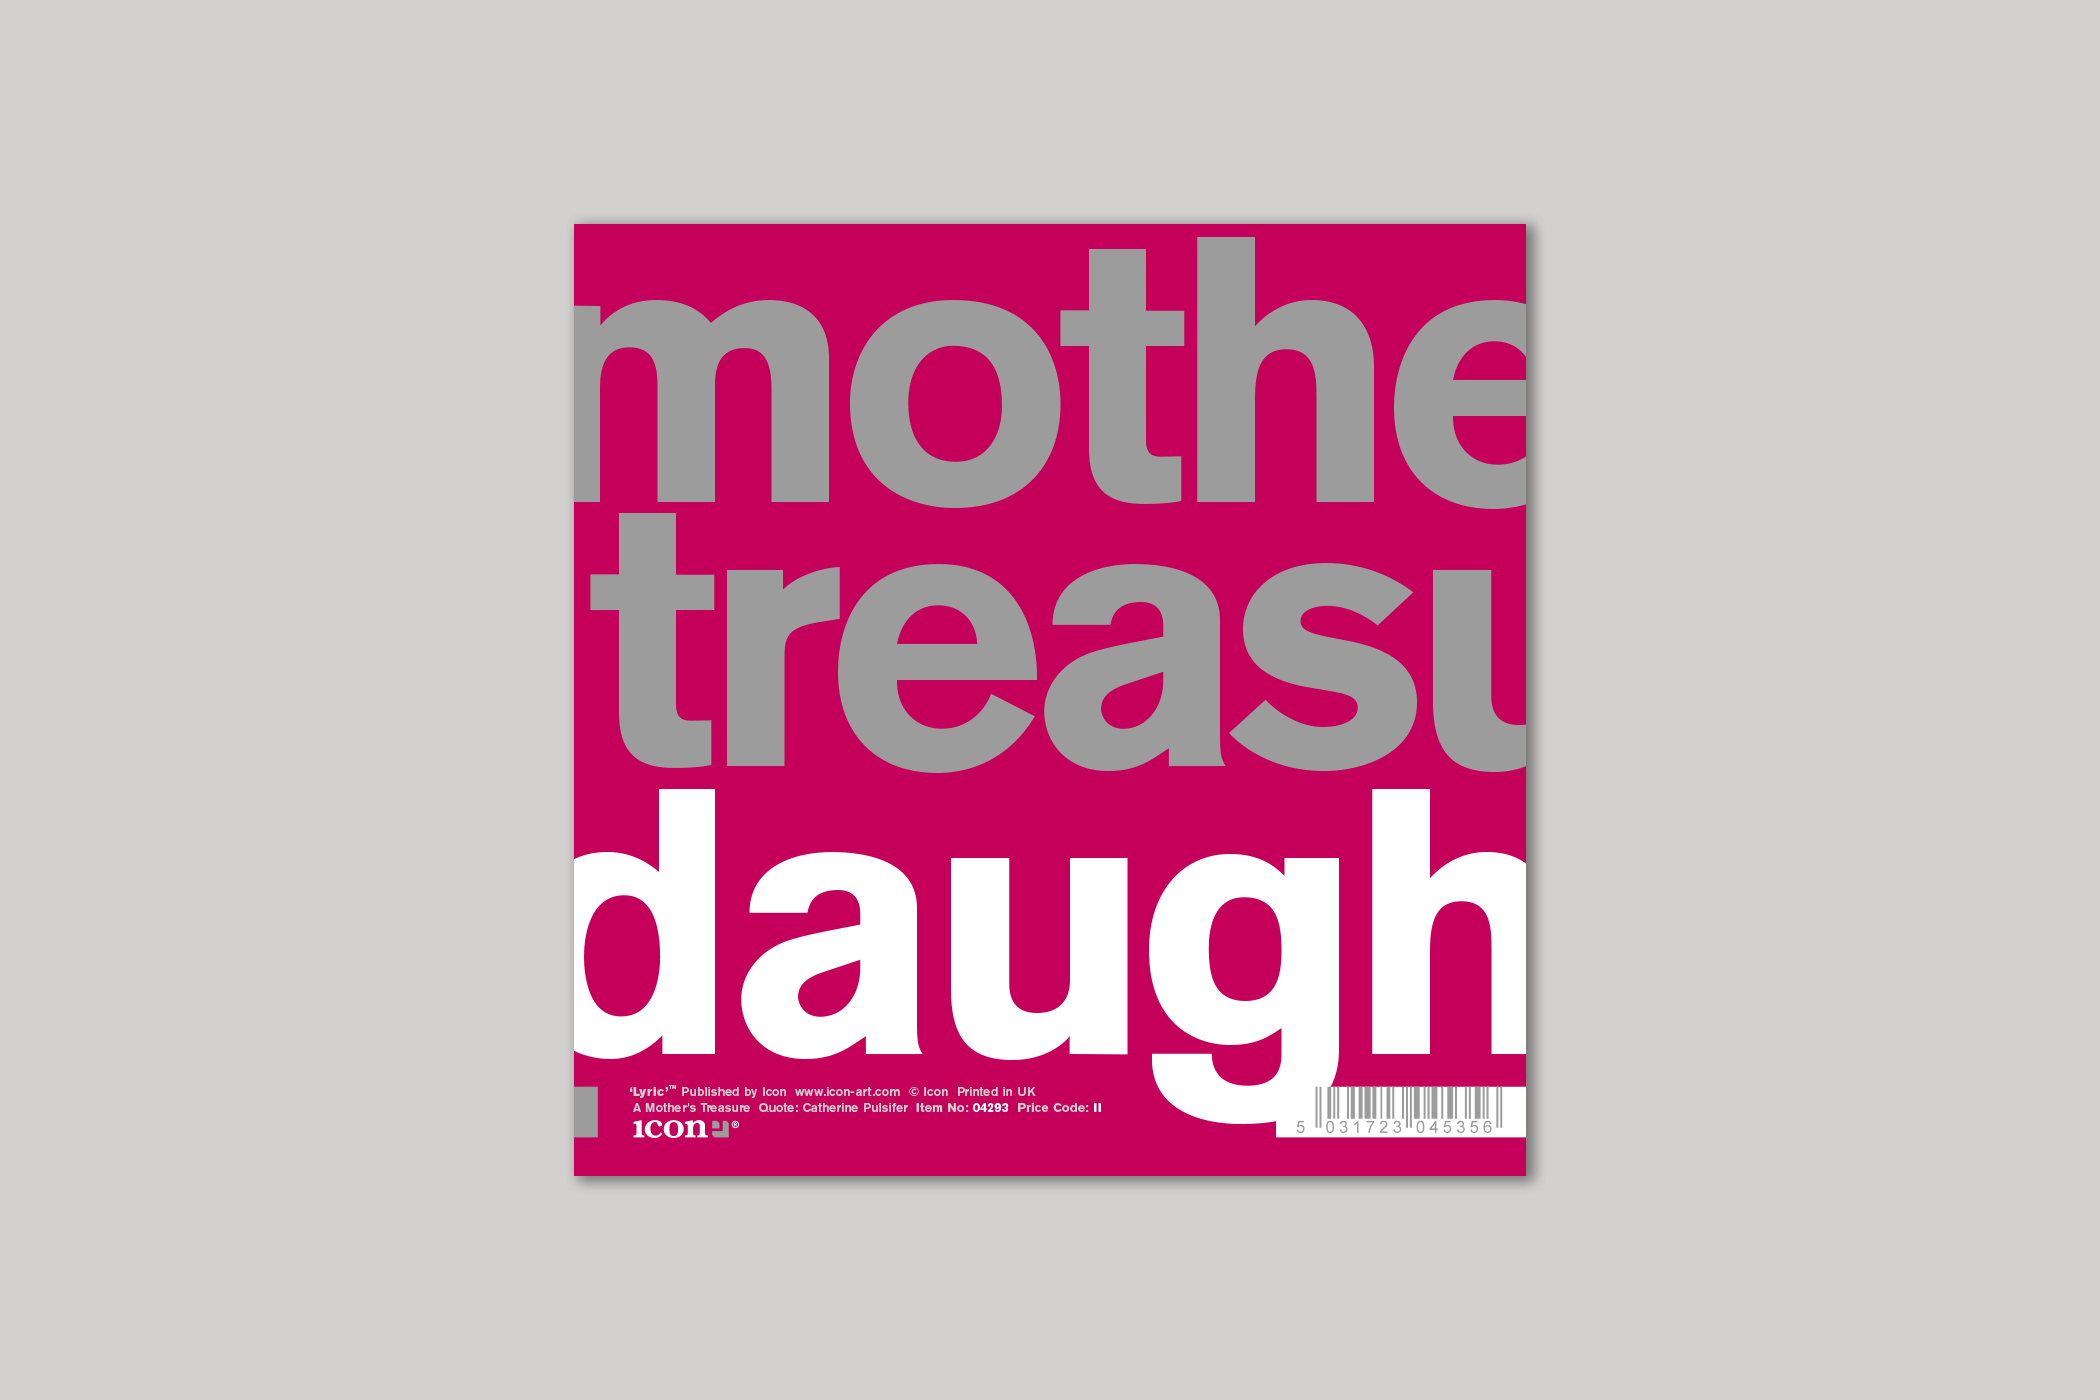 A Mother's Treasure daughter card from Lyric range of quotation cards by Icon, with envelope.